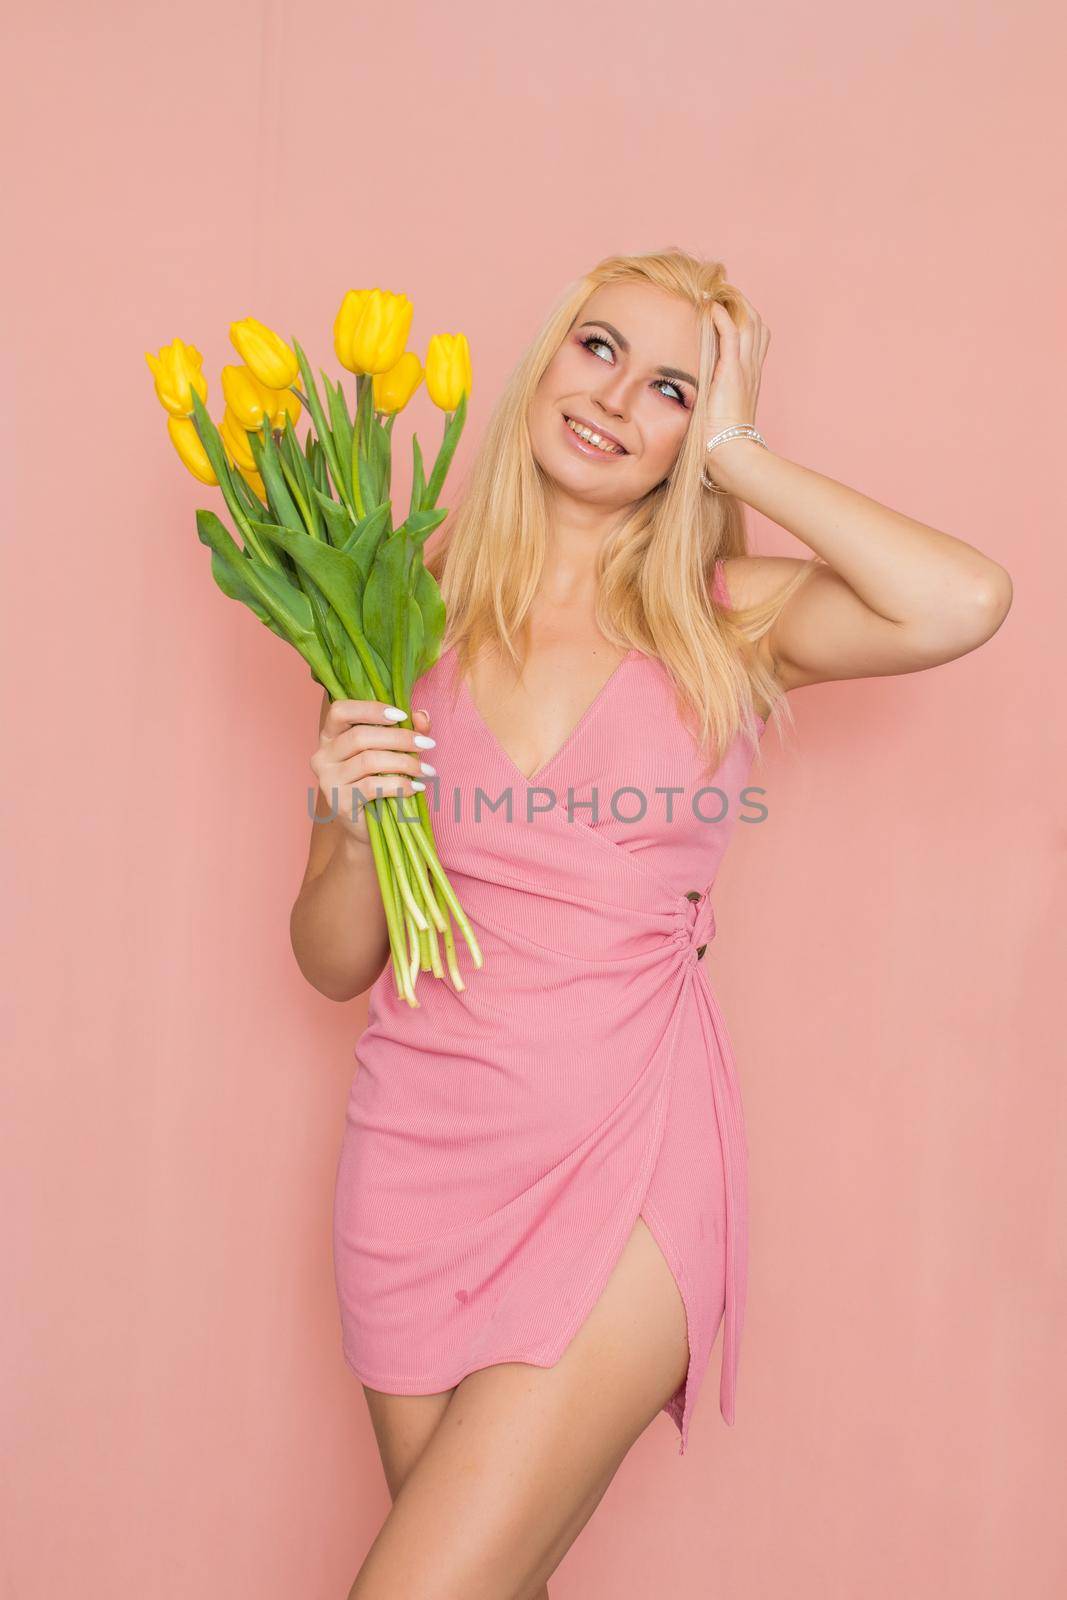 Adult blonde woman in pink dress posing over rosy background. Spring-summer clothing. She is holding bouquet of yellow tulips in her hands. Presents, surprise